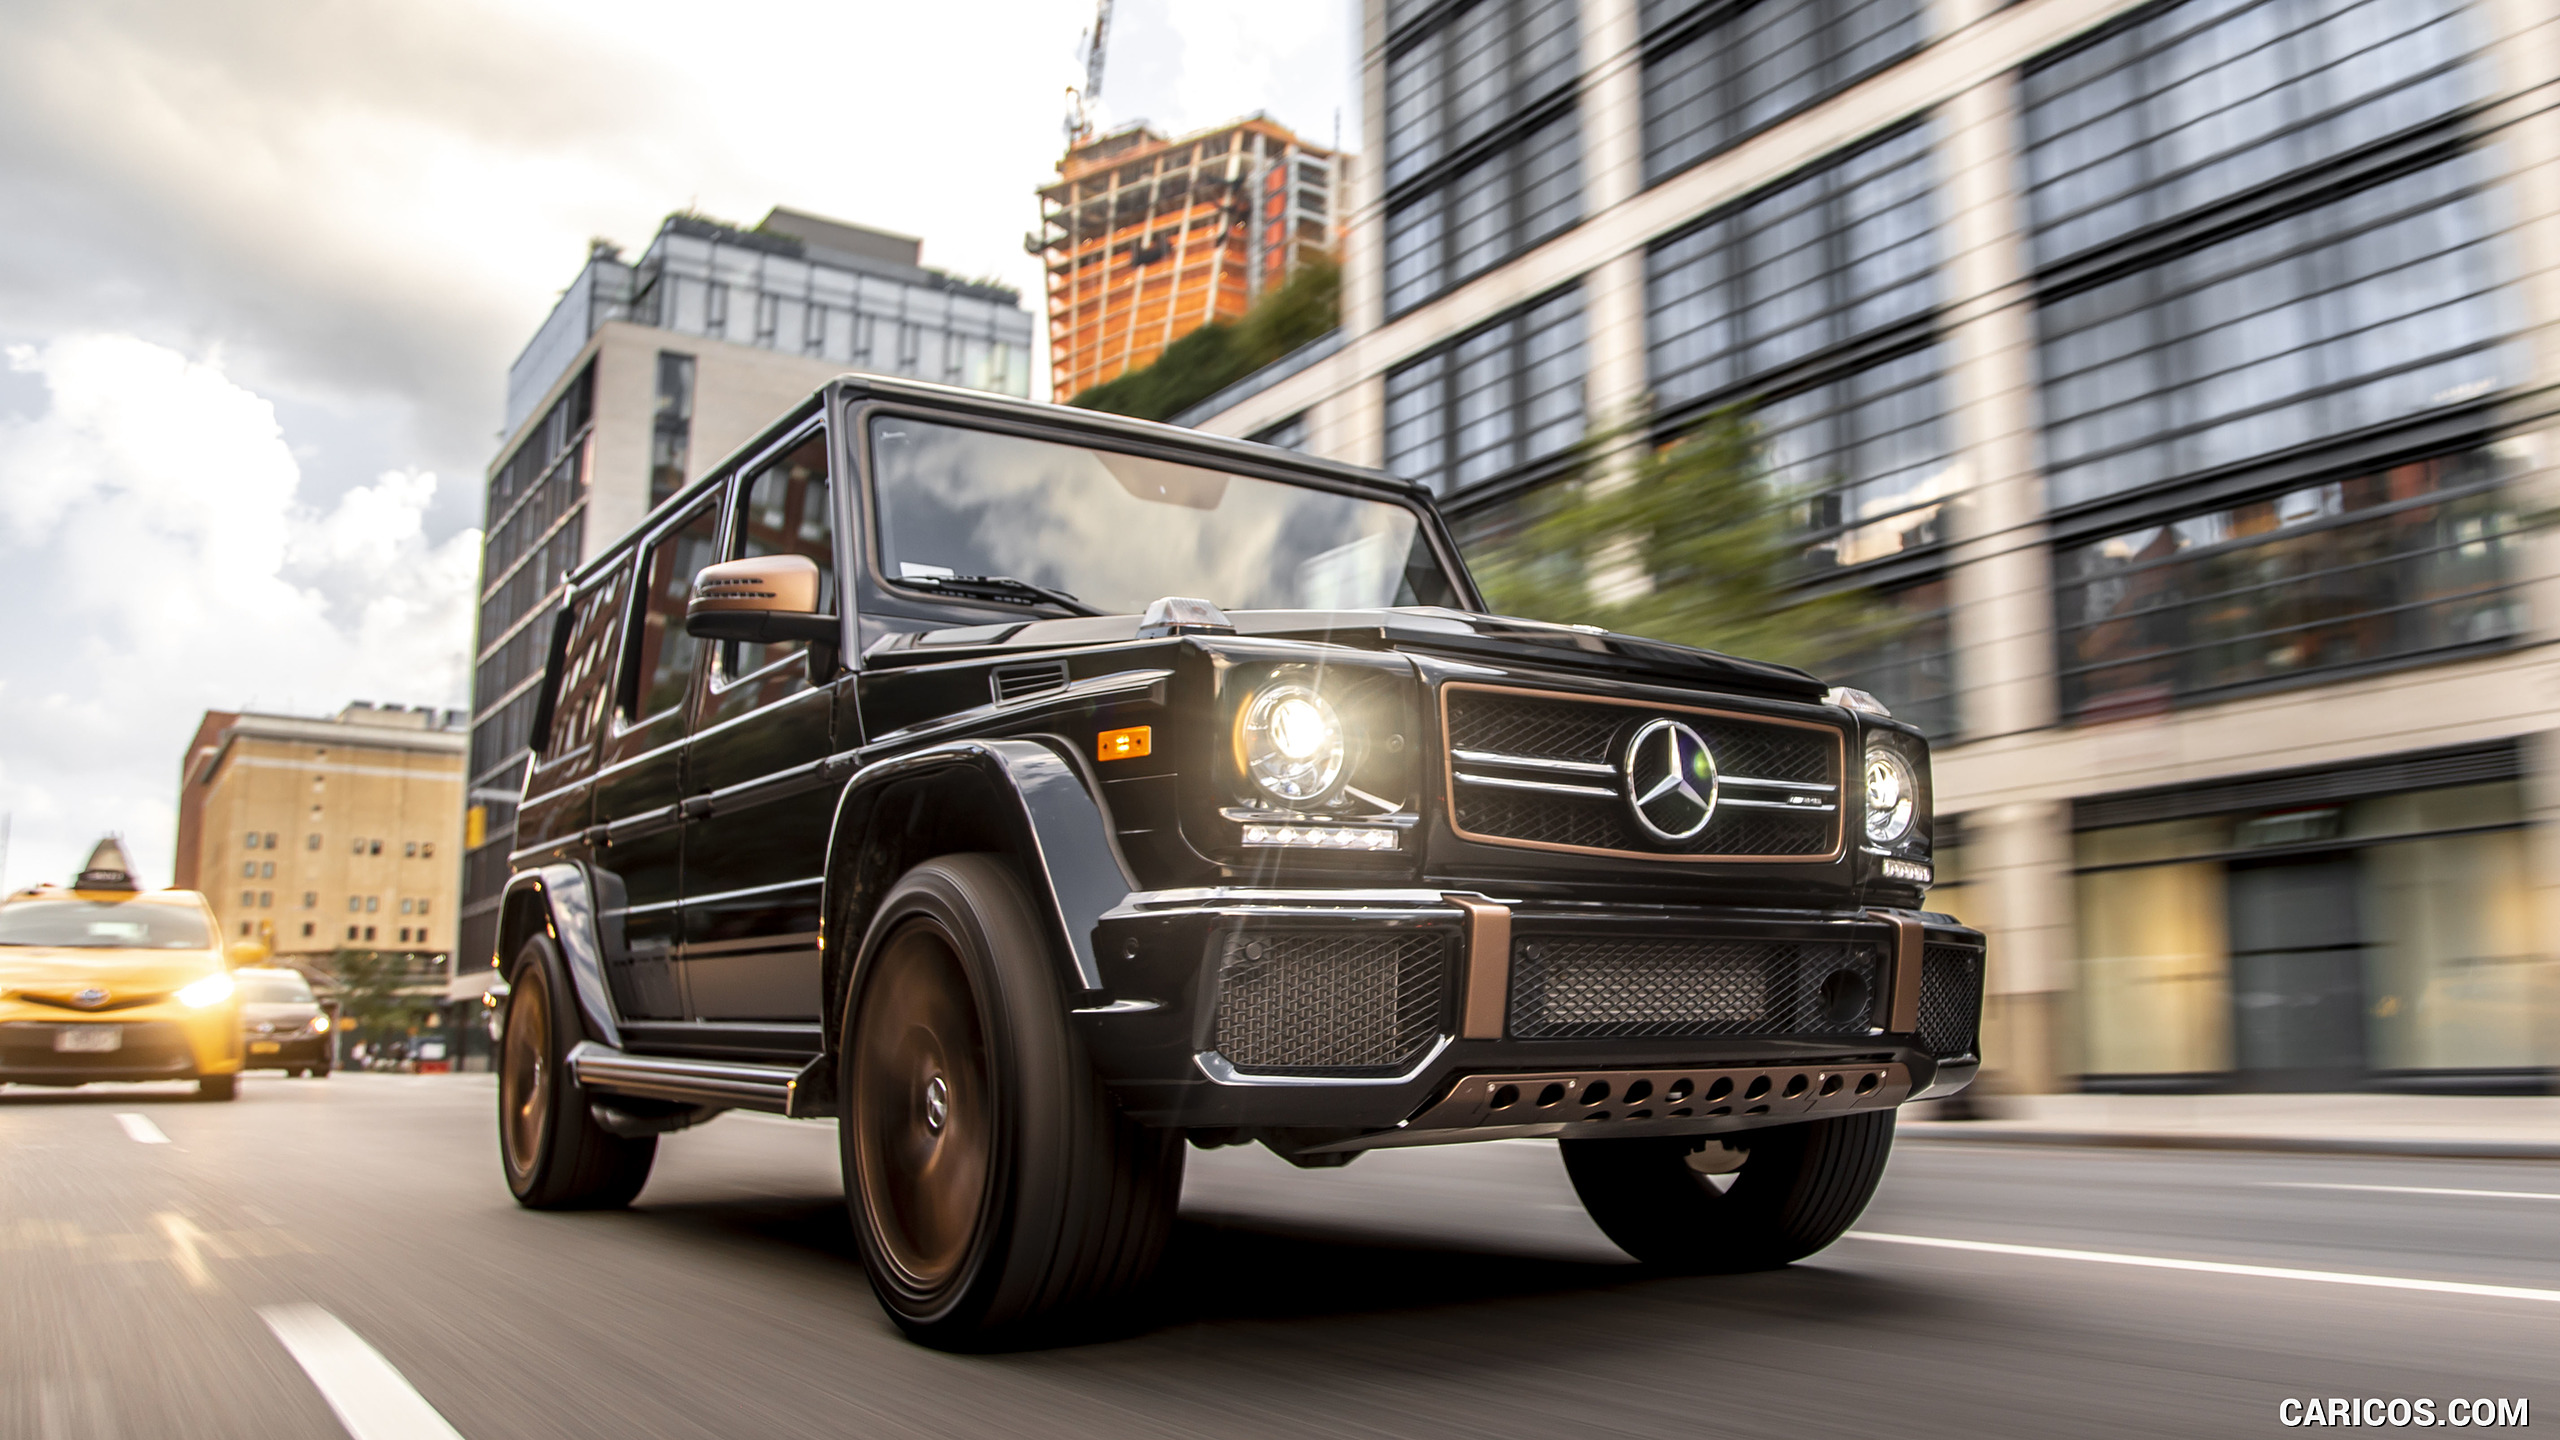 2018 Mercedes-AMG G65 Final Edition (US-Spec) - Front Three-Quarter, #28 of 70